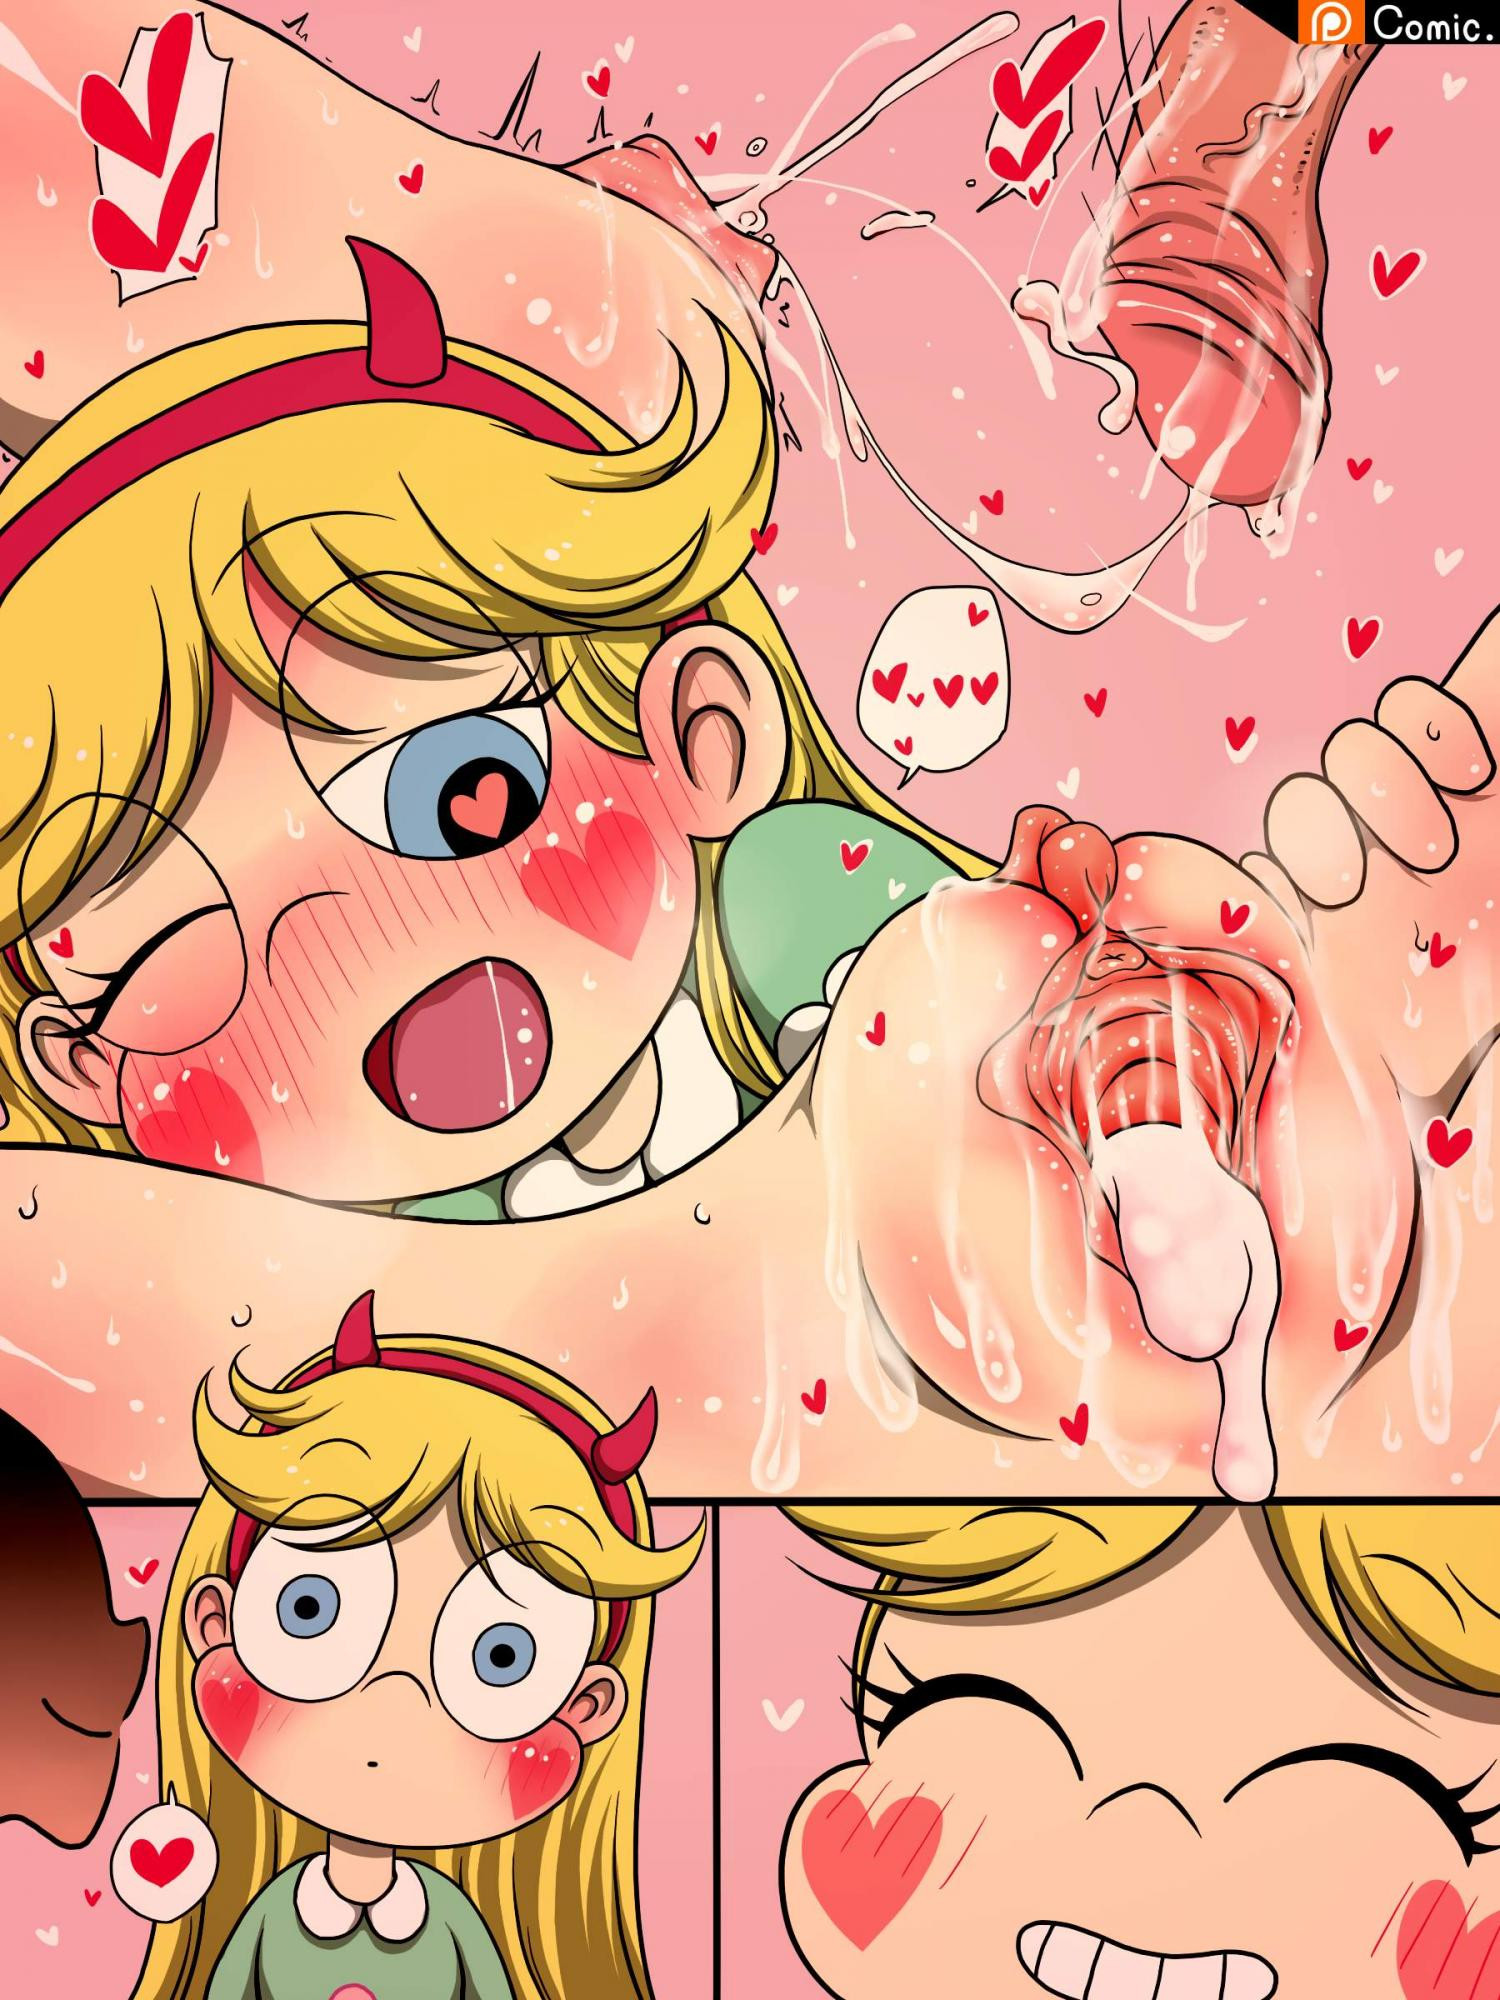 [Zat] Star Vs The Forces Of Evil – Foces of Dream - 6